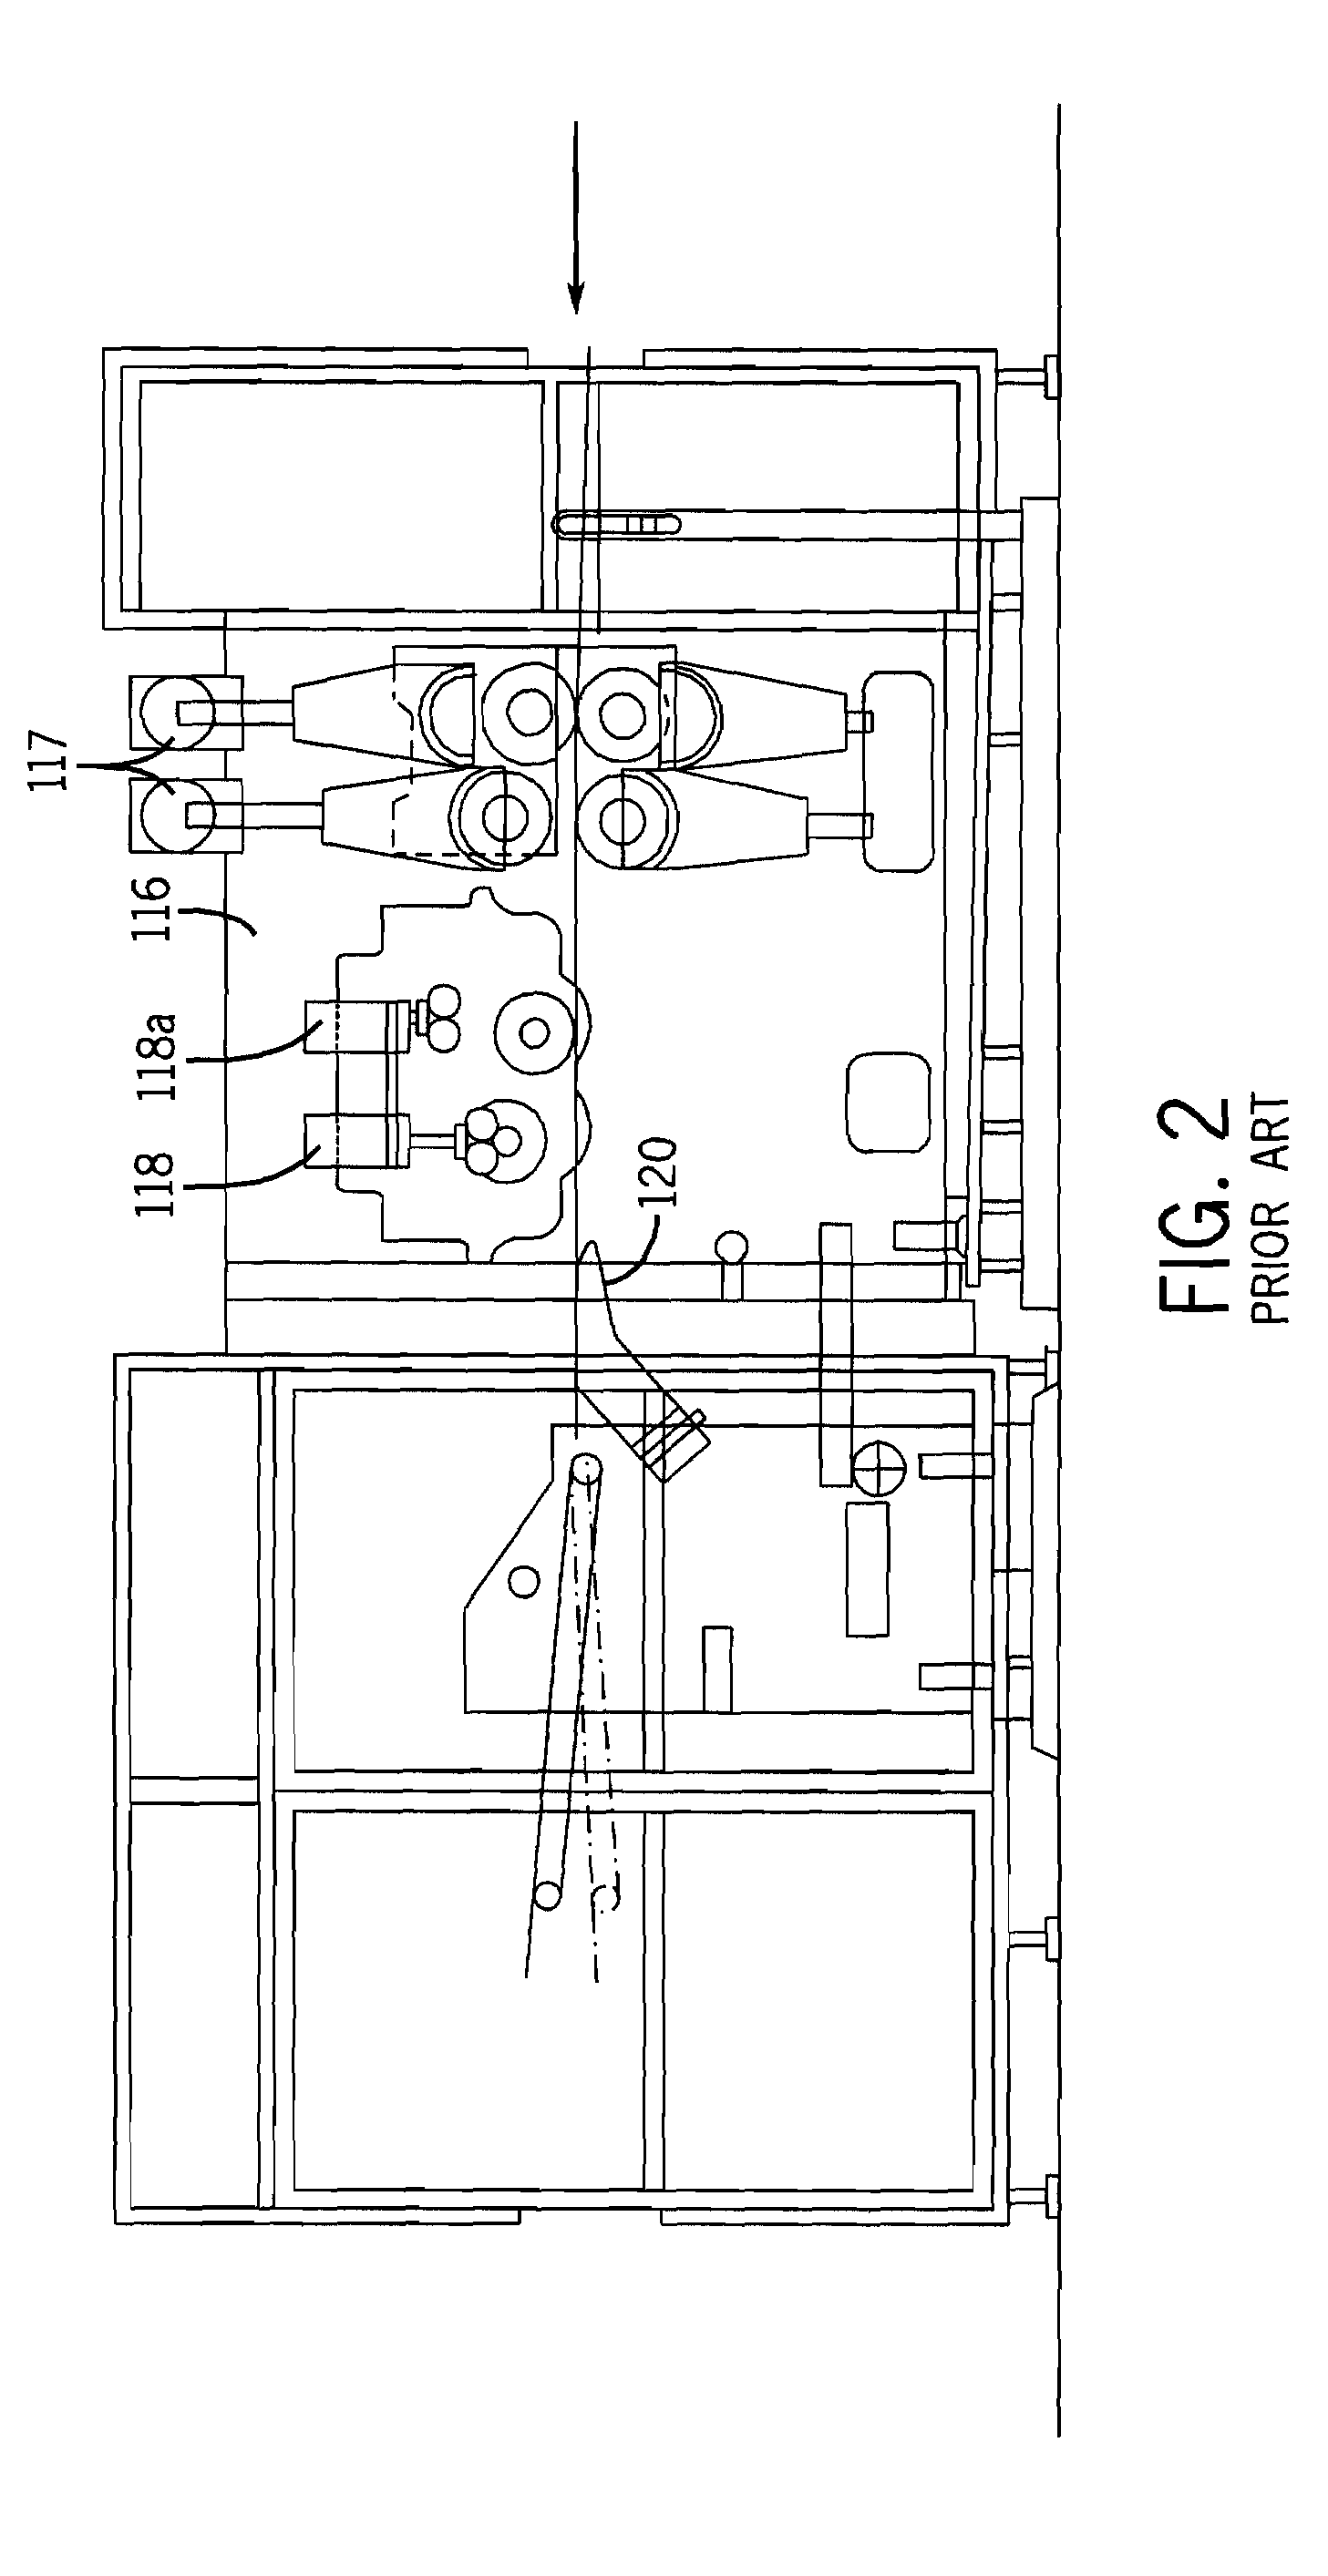 Method and Apparatus for a Rules-Based Utilization of a Minimum-Slit-Head Configuration Plunger Slitter